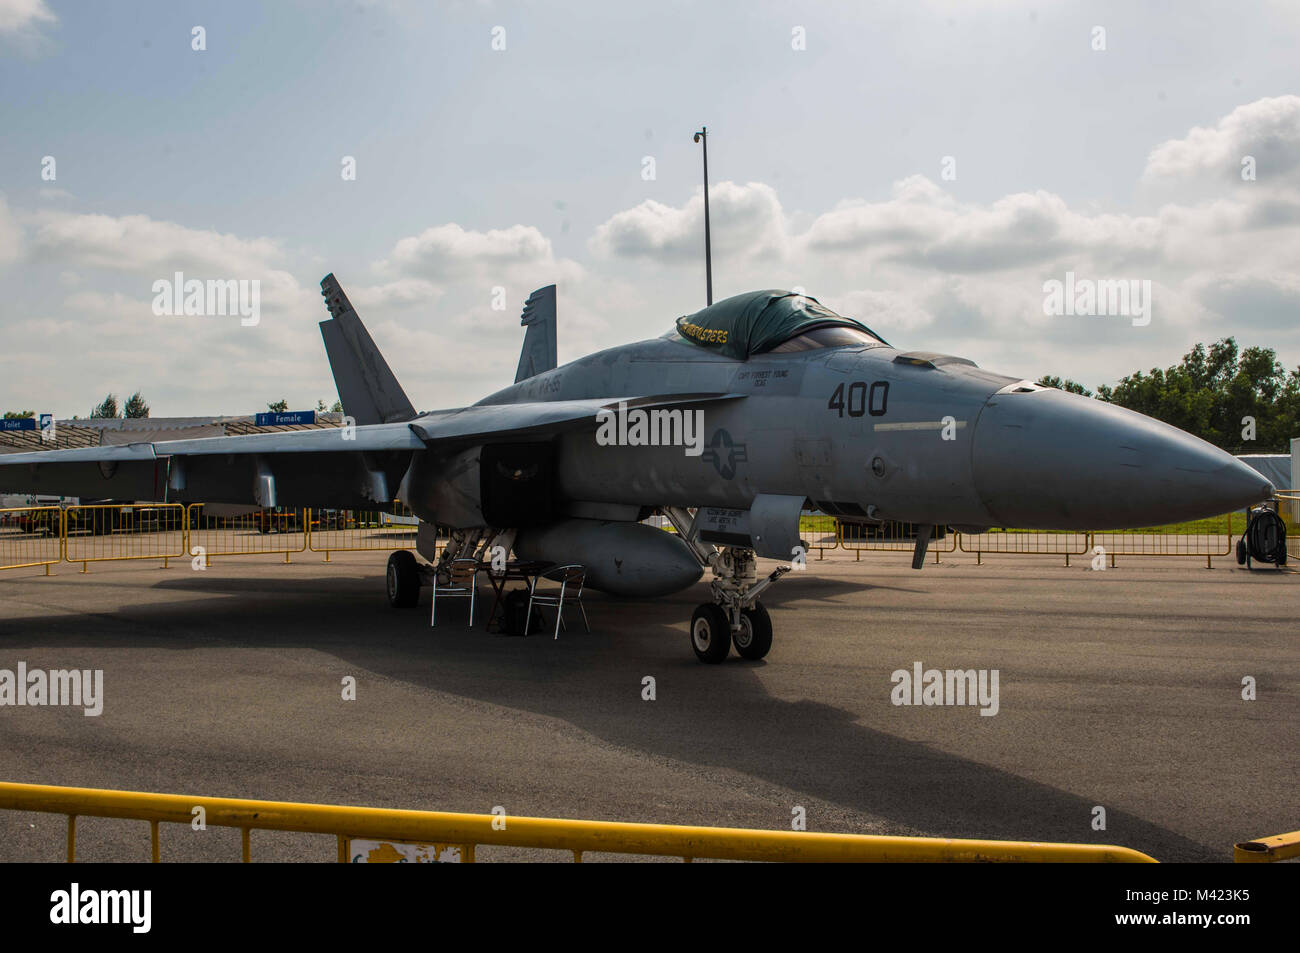 180208-N-FV739-042  CHANGI, Singapore (Feb. 8, 2018) - An F/A-18F Super Hornet assigned to the 'Dambusters' of Strike Squadron (VFA) 195 is set for display at the Singapore Air Show at Changi Exhibition Center. The show was an opportunity for the U.S. to demonstrate flexible combat capabilities and to deter adversaries, while reassuring allies and partners. (U.S. Navy photo by Mass Communication Specialist 3rd Class Christopher A. Veloicaza) Stock Photo